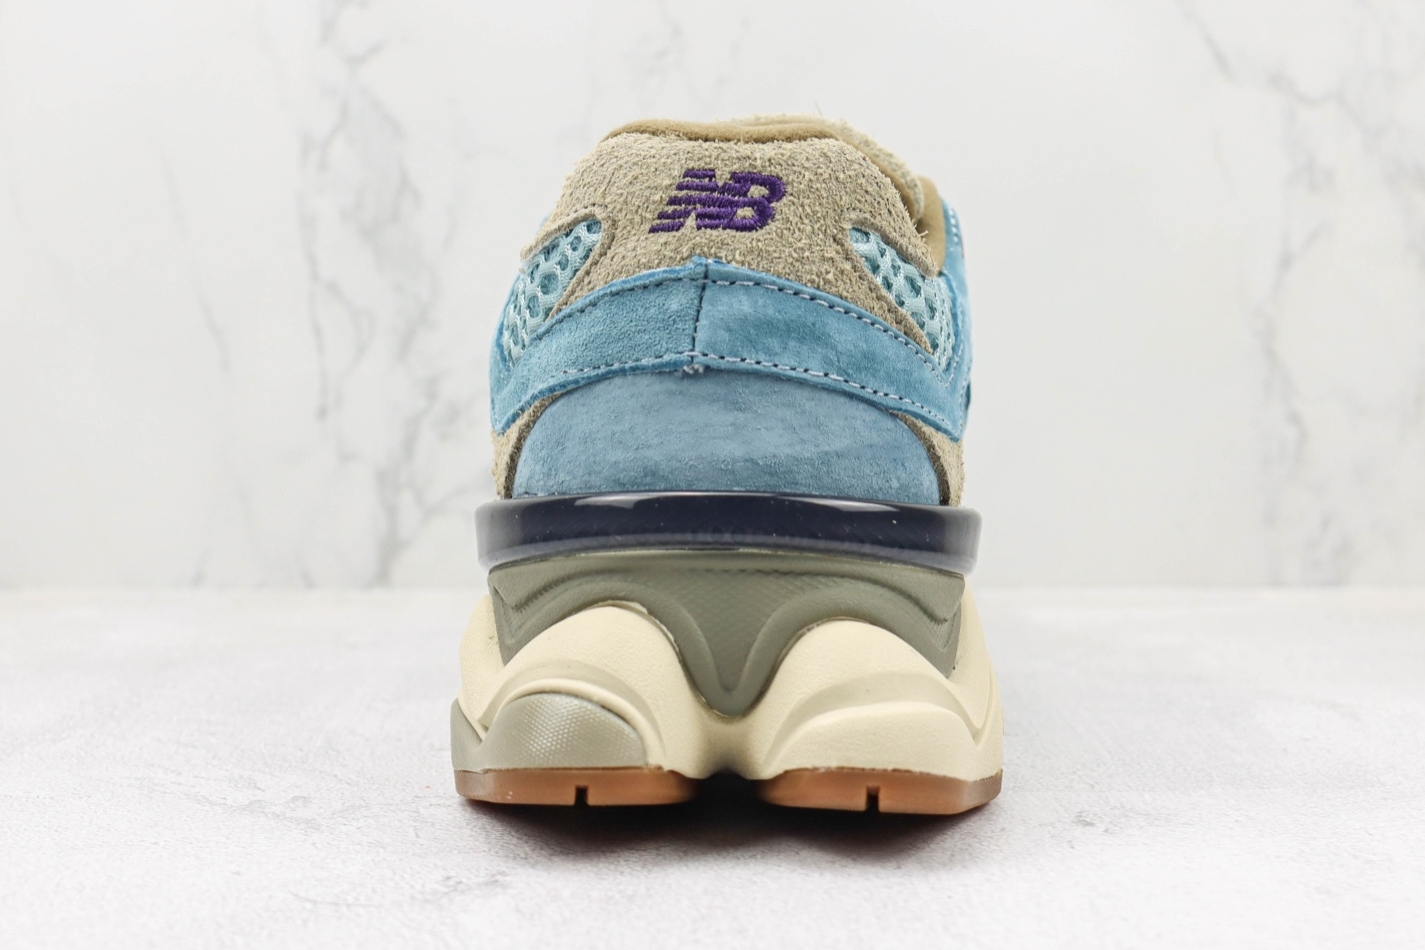 New Balance Bodega X 9060 Age Of Discovery Citadel - Exclusive Release